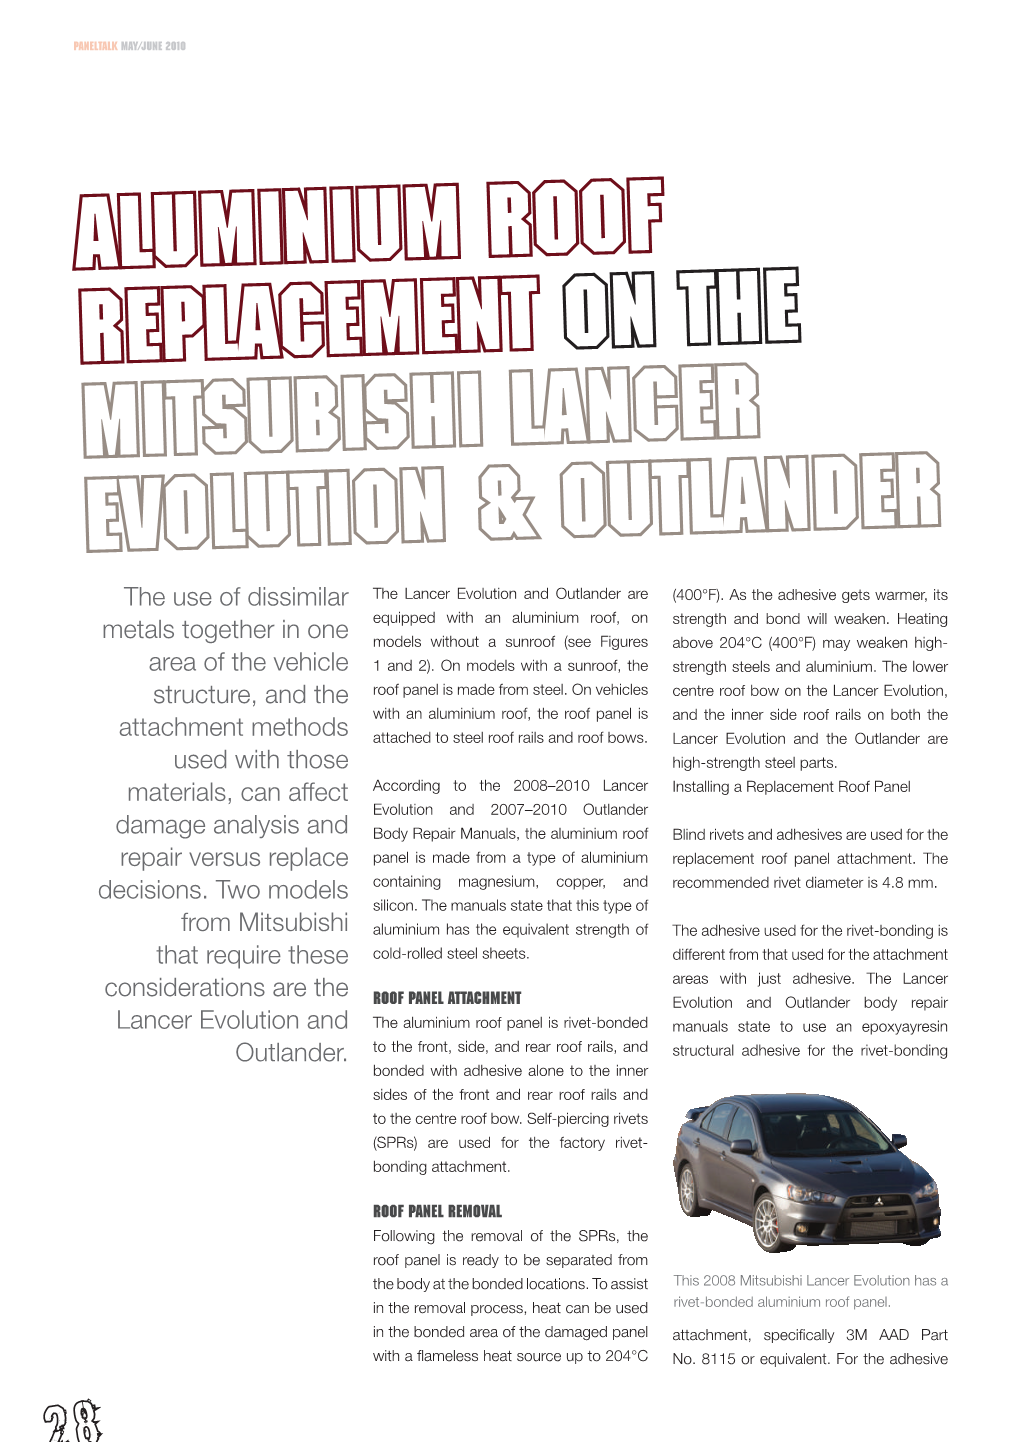 ALUMINIUM ROOF REPLACEMENT on the MITSUBISHI LANCER EVOLUTION & OUTLANDER the Use of Dissimilar the Lancer Evolution and Outlander Are (400°F)